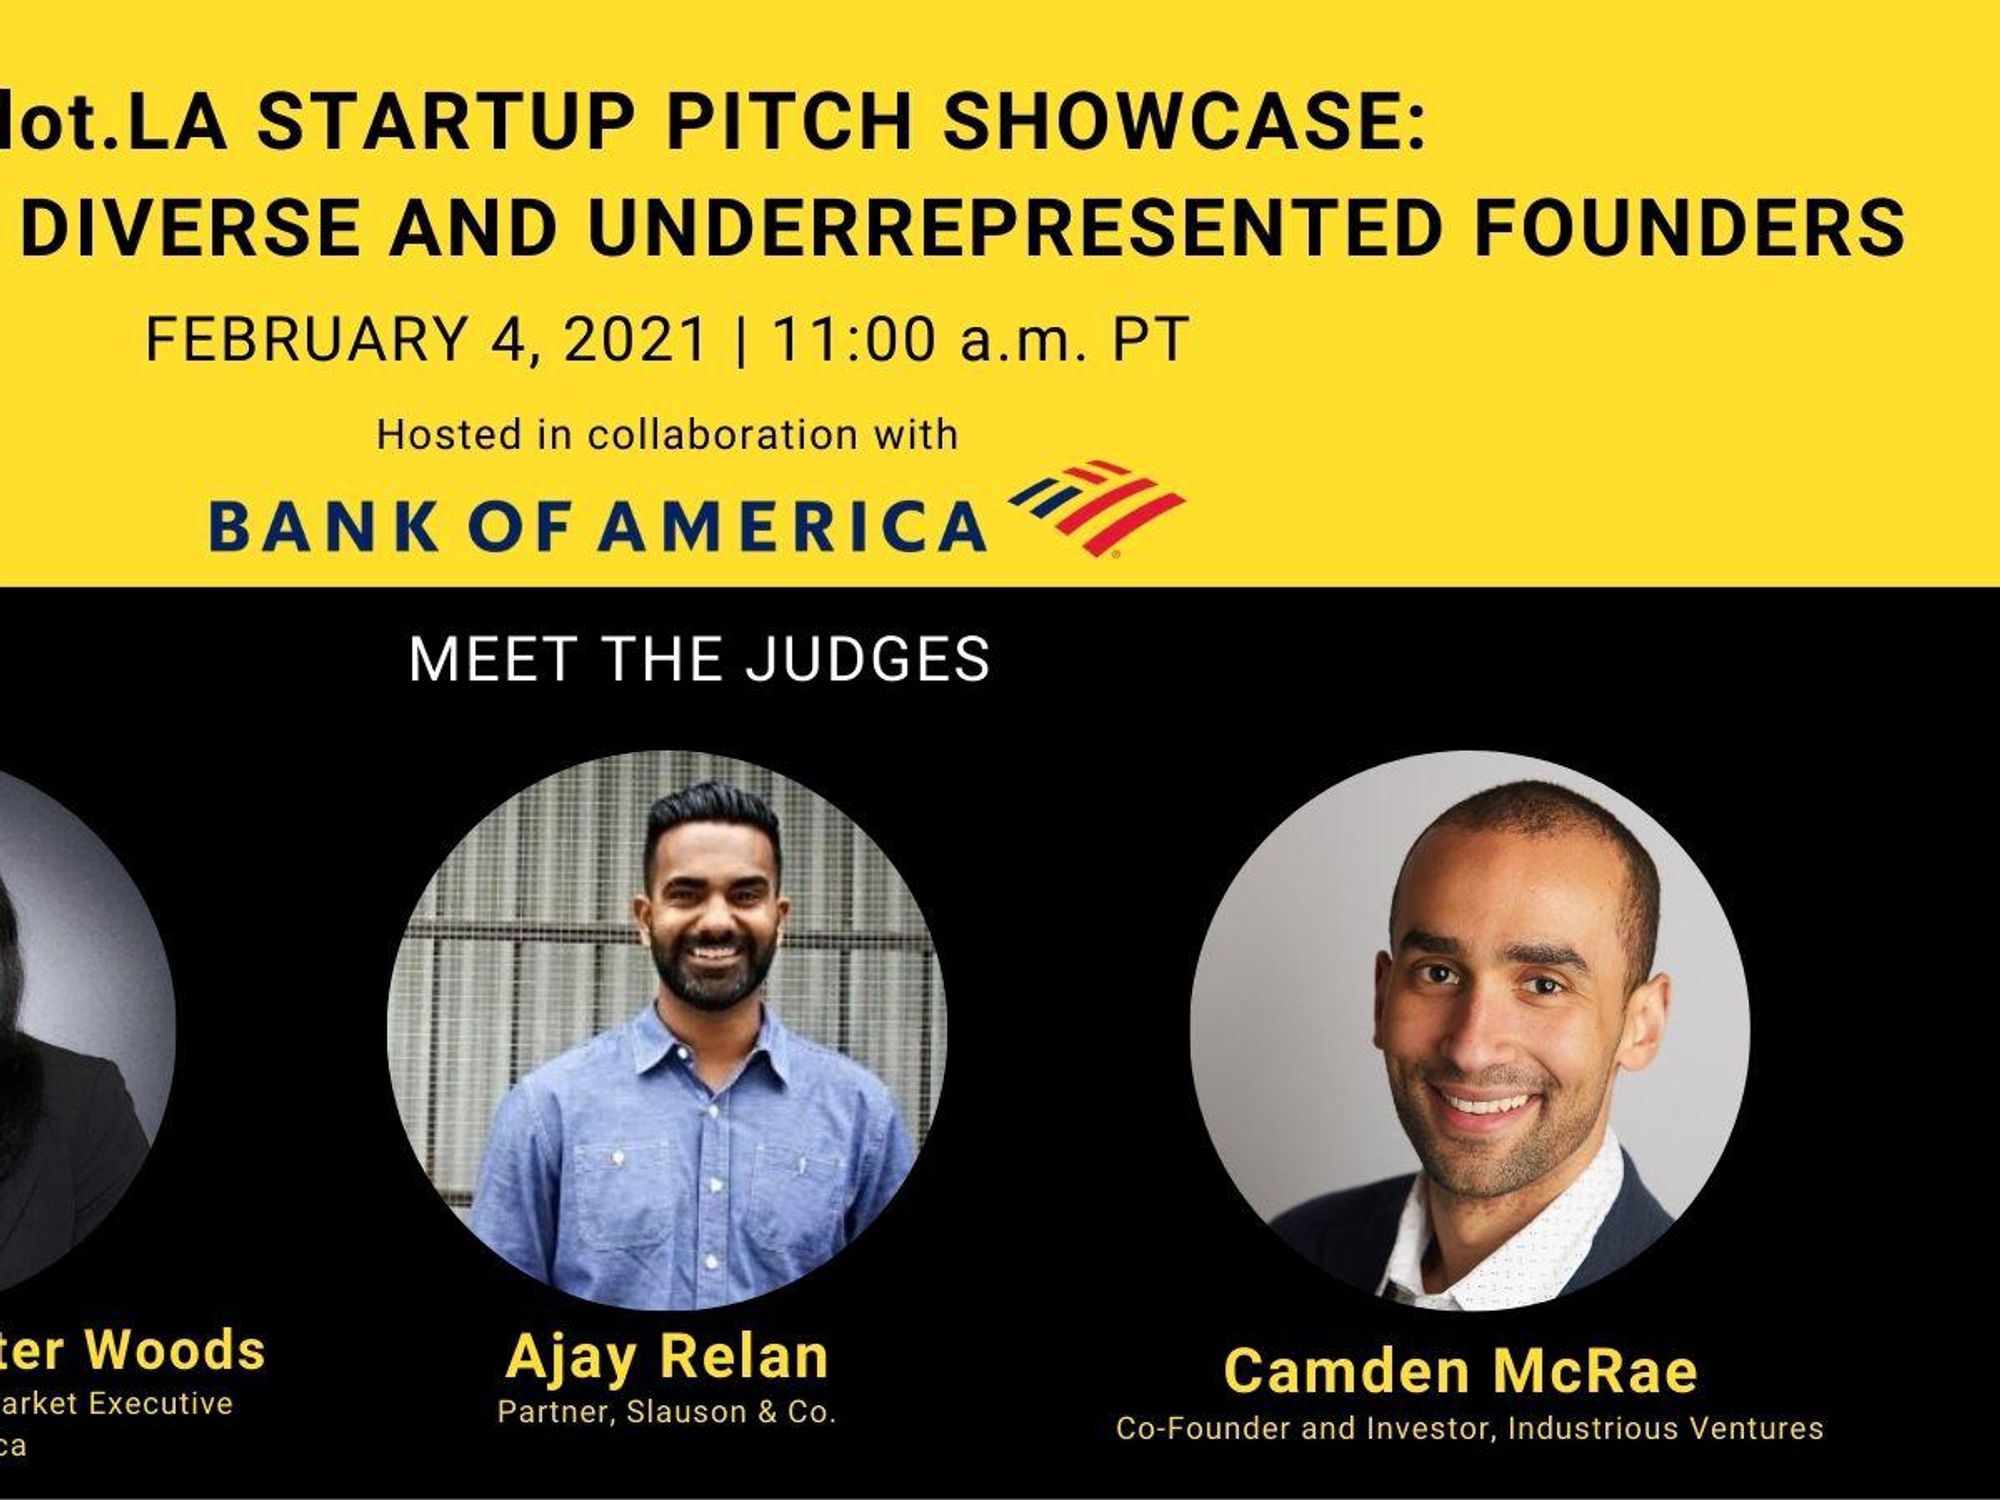 Watch Our Startup Pitch Showcase Featuring Diverse and Underrepresented Founders in LA